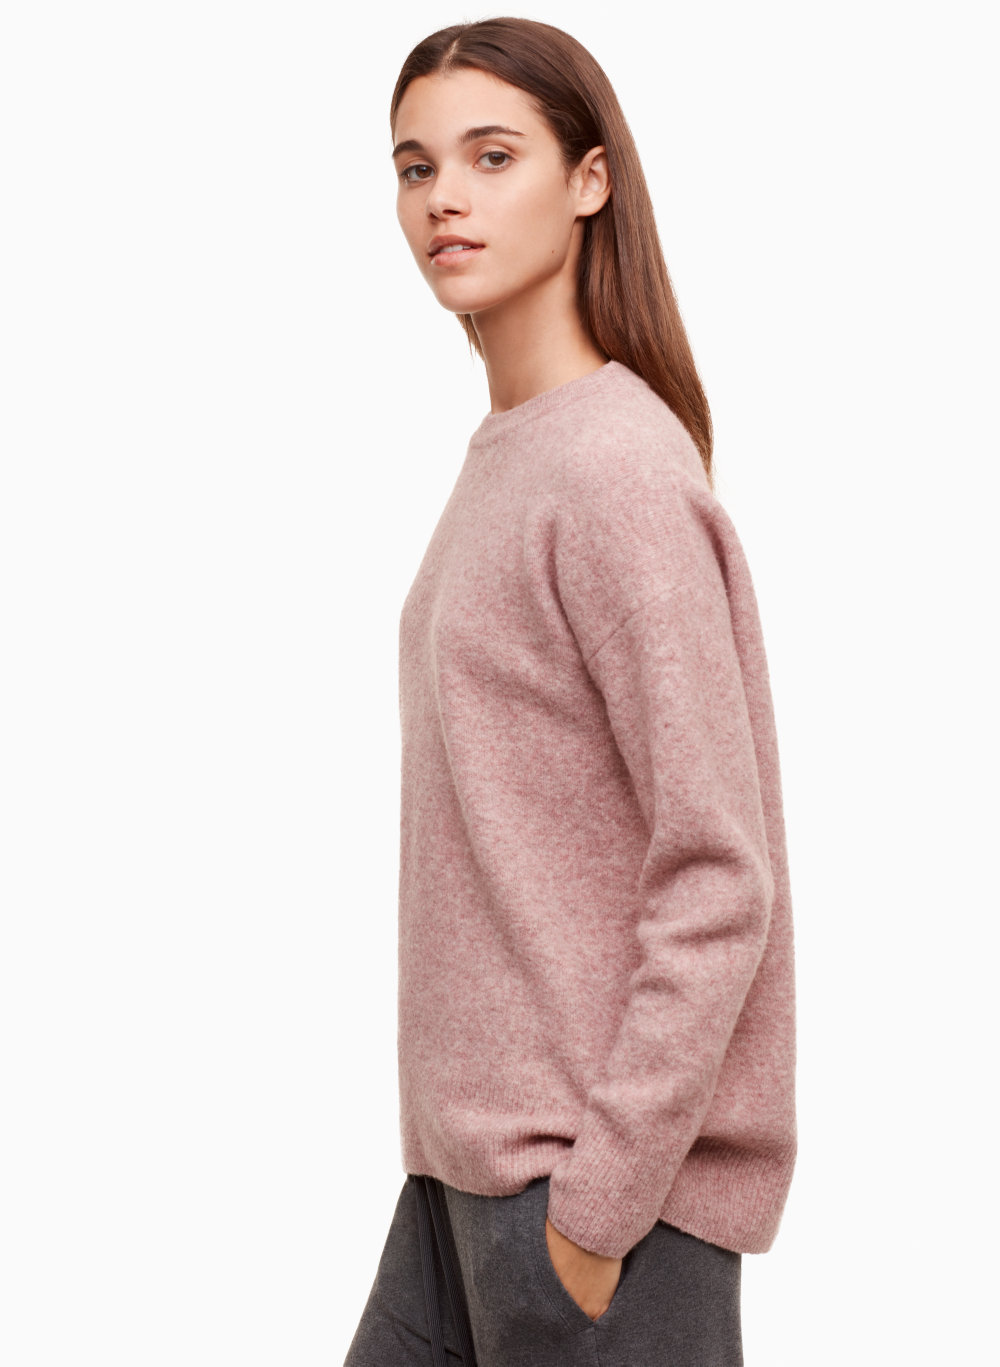 The Group by Babaton THURLOW SWEATER | Aritzia